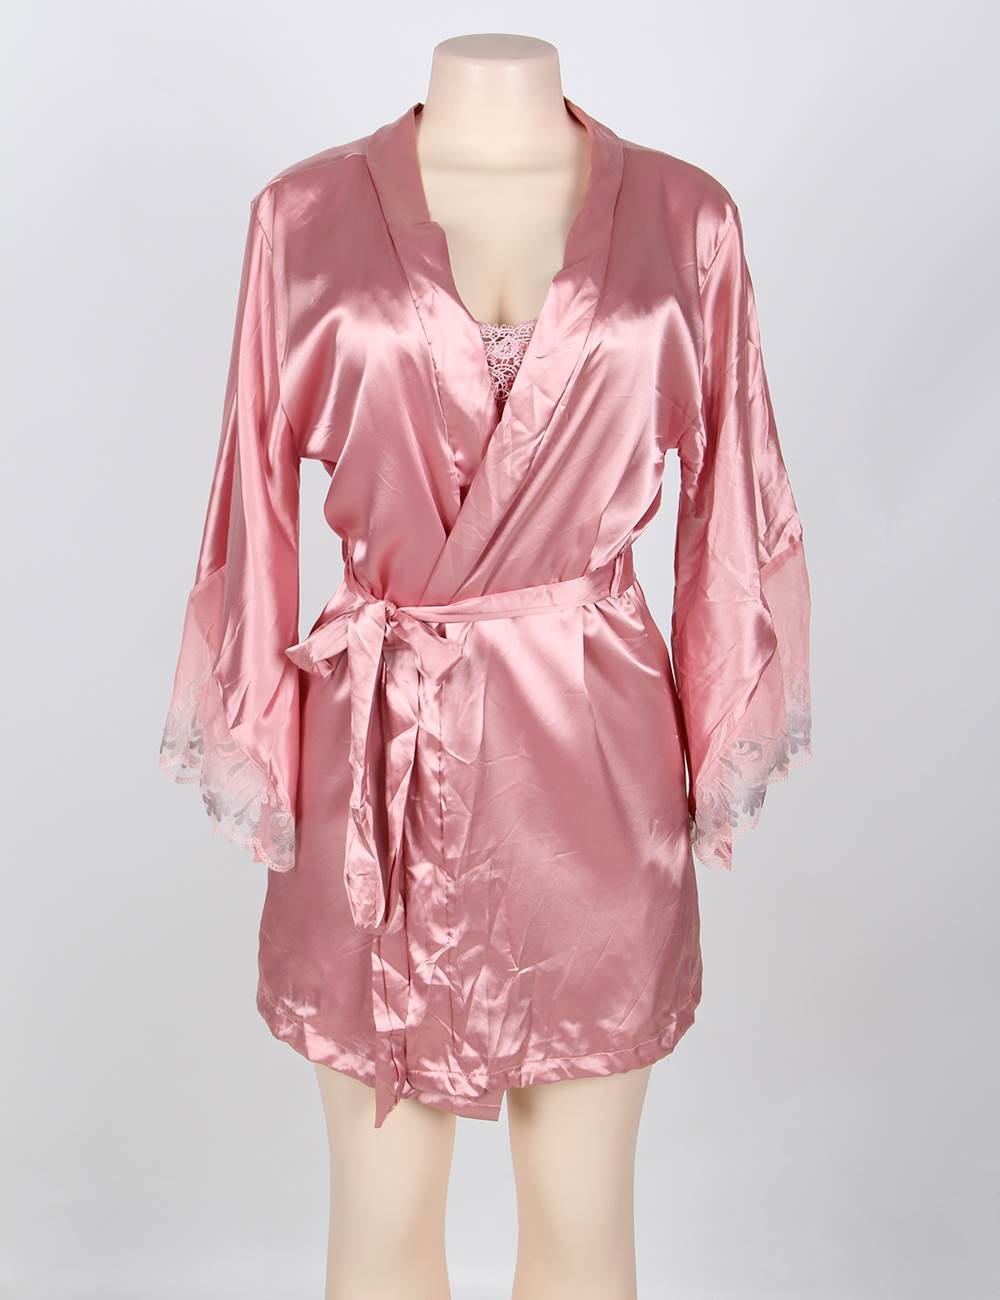 In Stock Two-Piece Satin Pink Belted Sleepwear